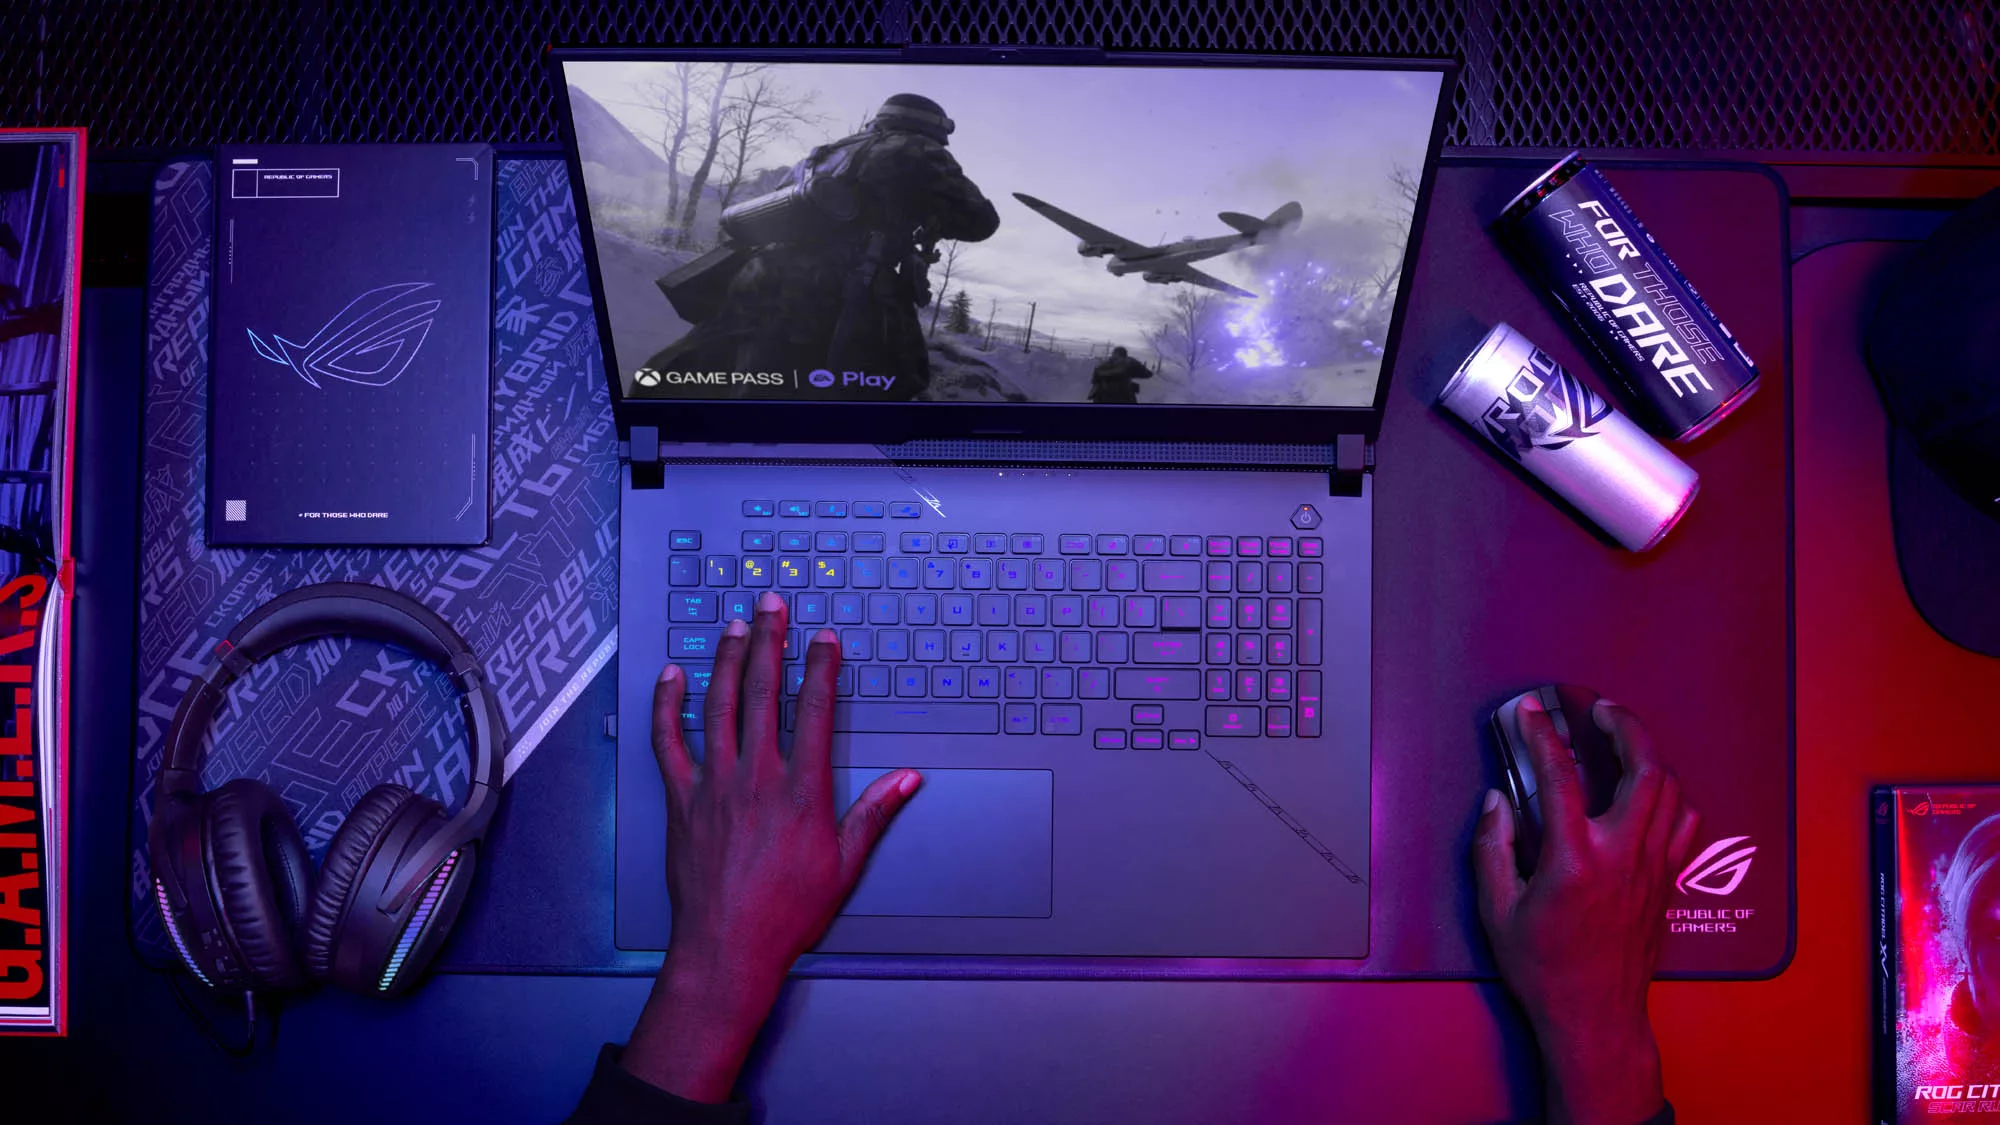 The ROG Strix SCAR 17 sitting on a desk, with two hands on the machine playing a game on-screen.